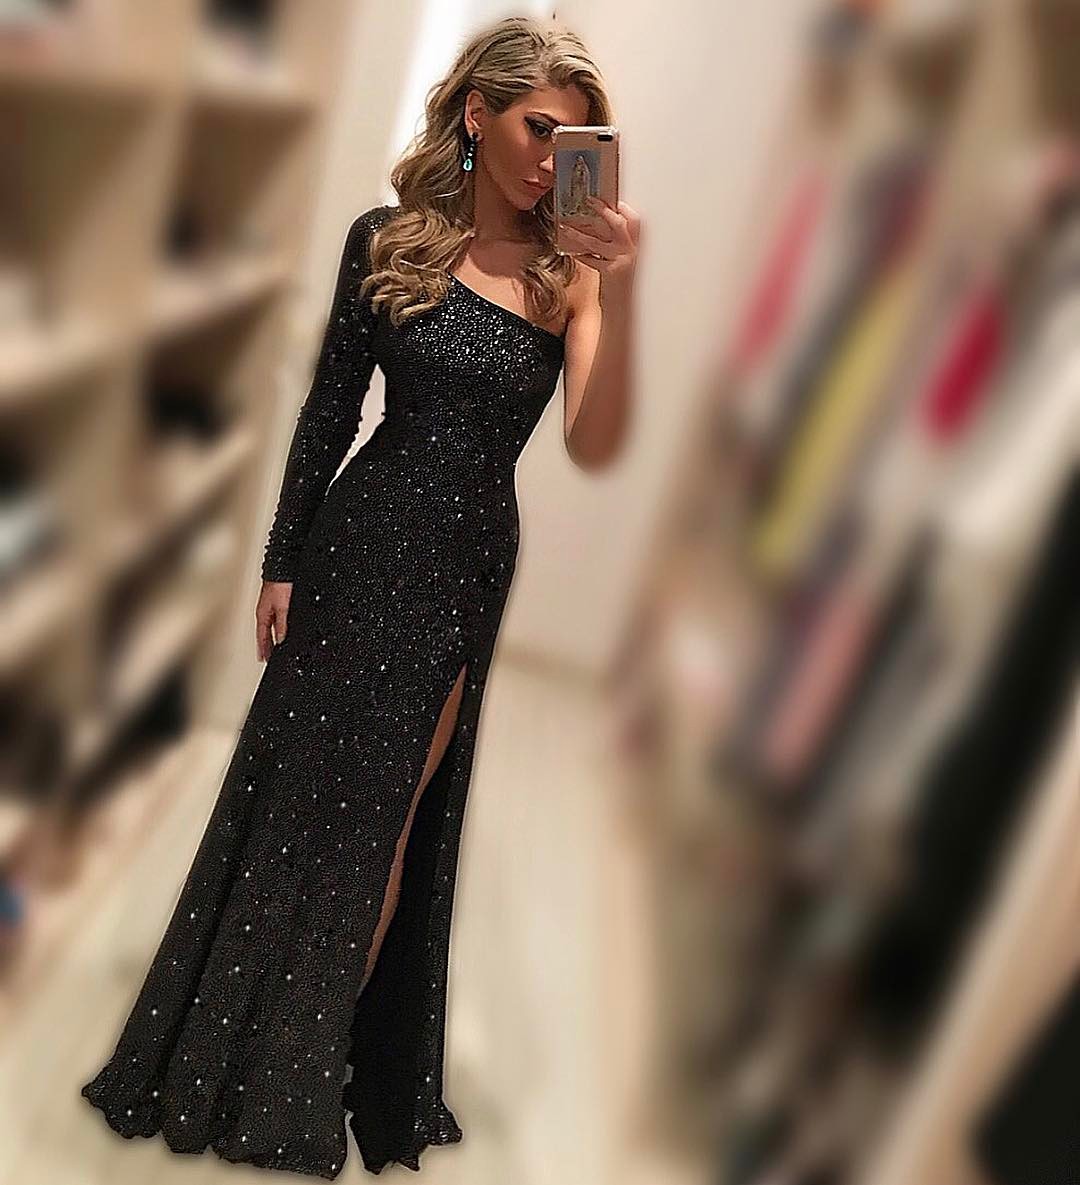 Black Evening Dresses,One Shoulder Beads and Crystal Evening Party Dress ,Sexy Side Slit Prom Dresses,Formal Dress,Evening Dresses Long